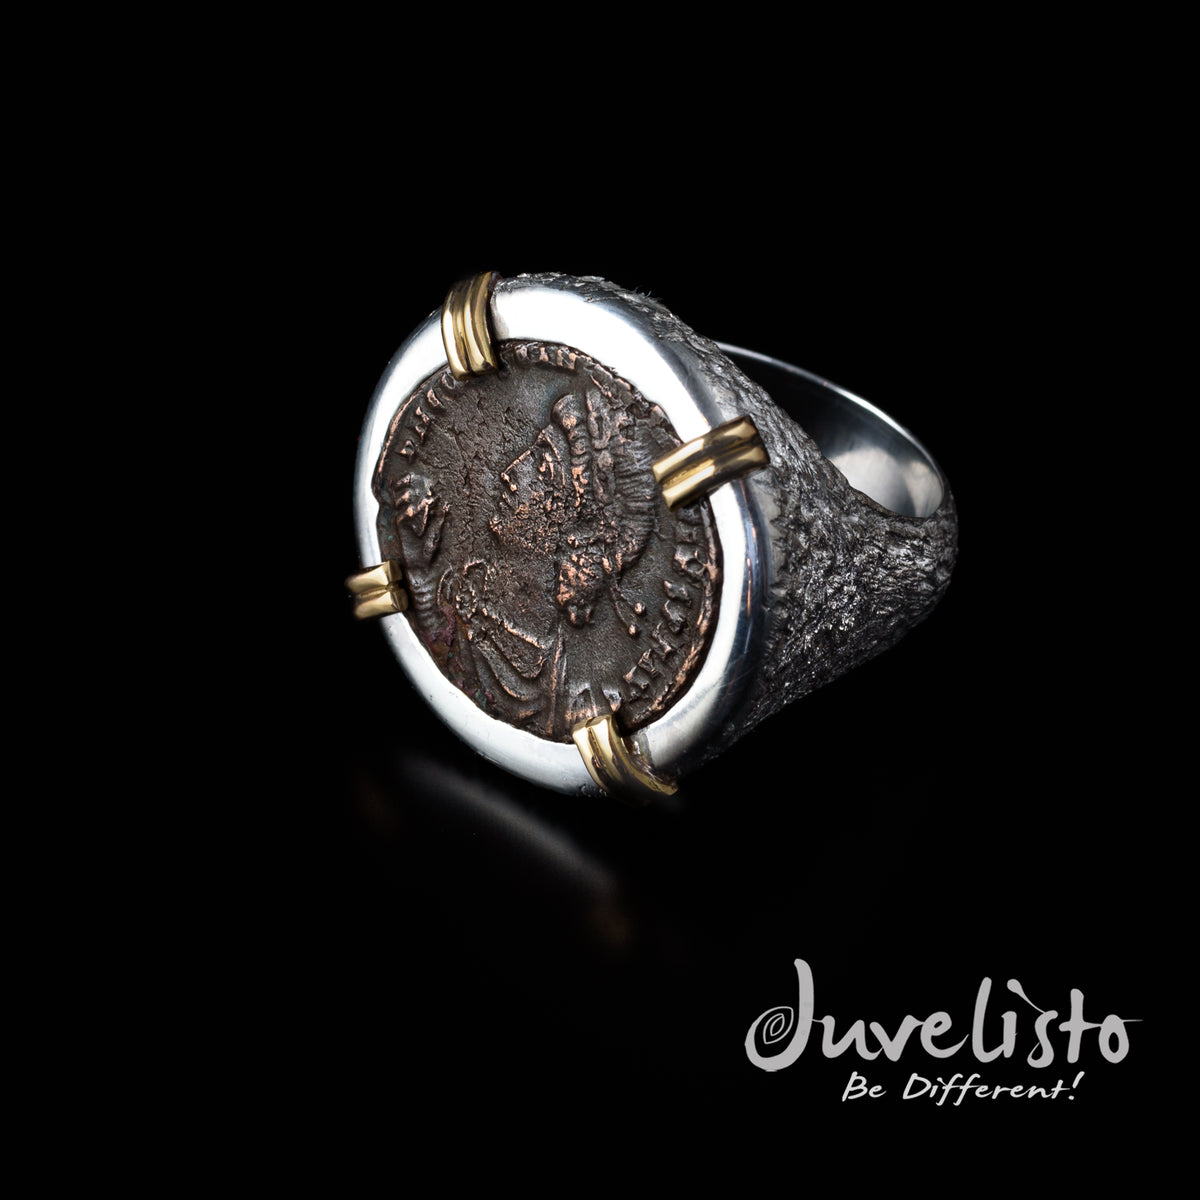 Juvelisto Design  Roman Empire Coin in Sterling Silver Ring w/ 14K Gold Claws